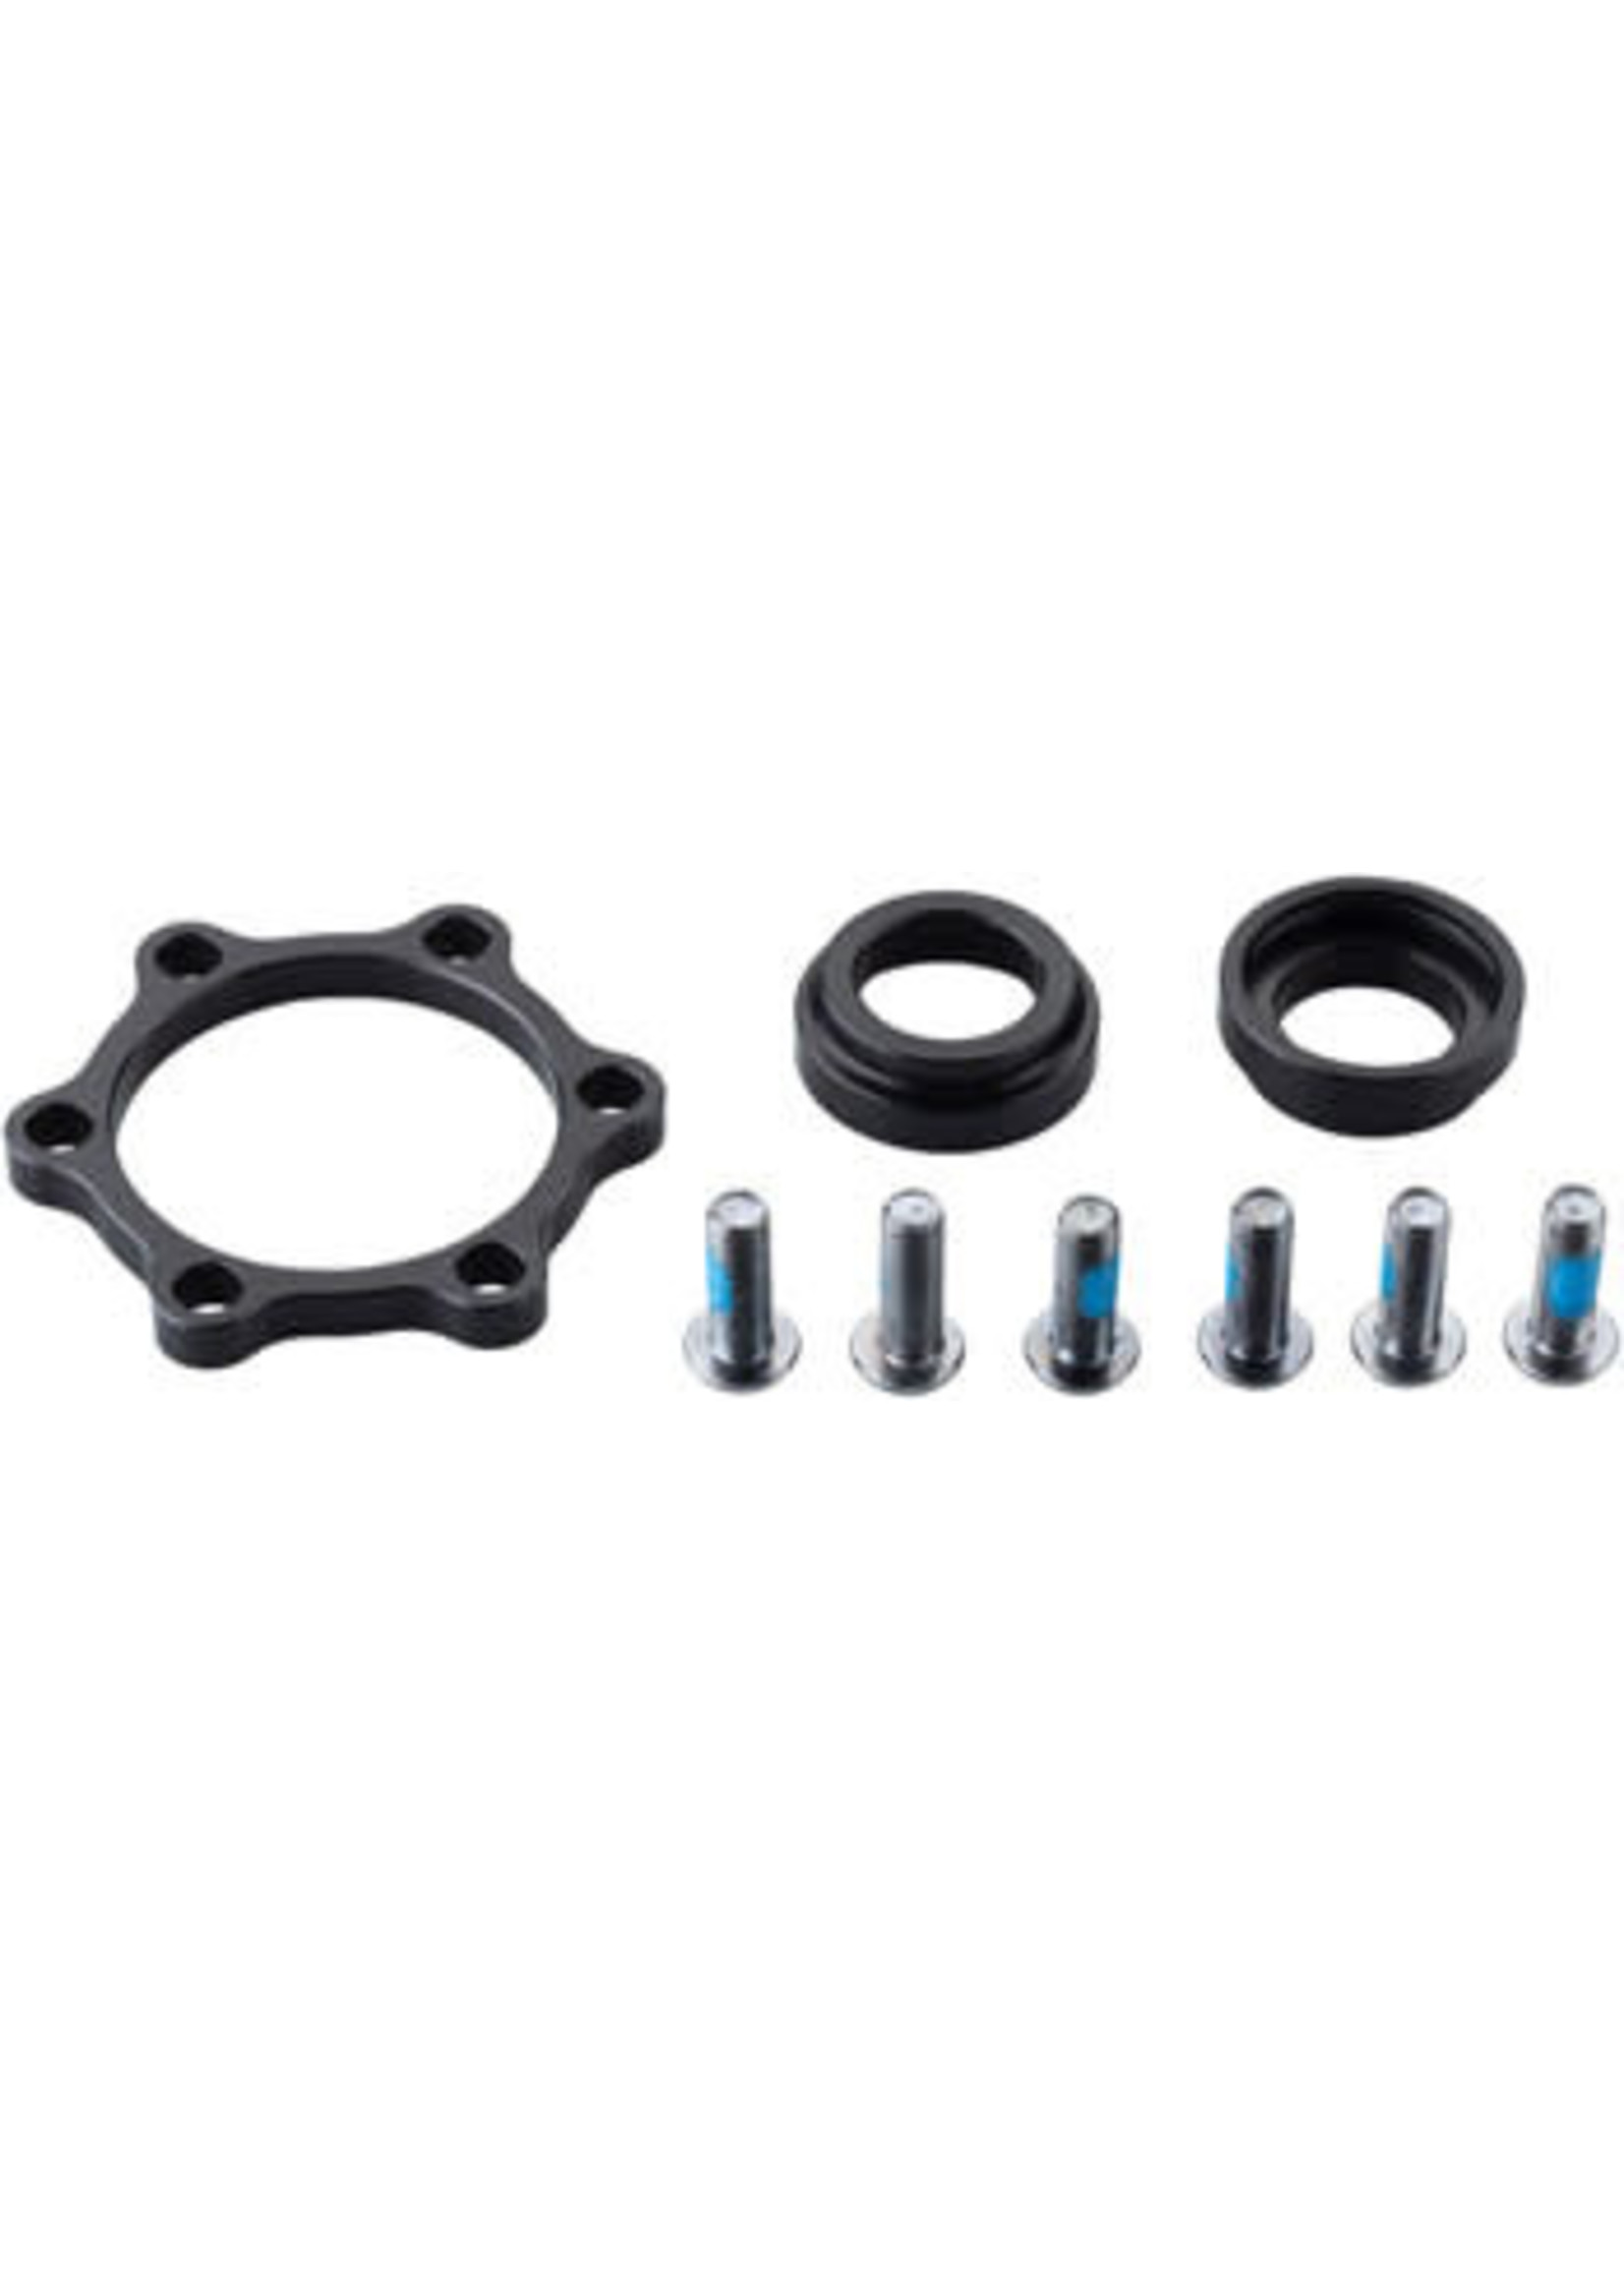 MRP MRP Better Boost Endcap Kit - Converts 15mm x 100mm to Boost 15mm x 110mm - fits King ISO 6-bolt